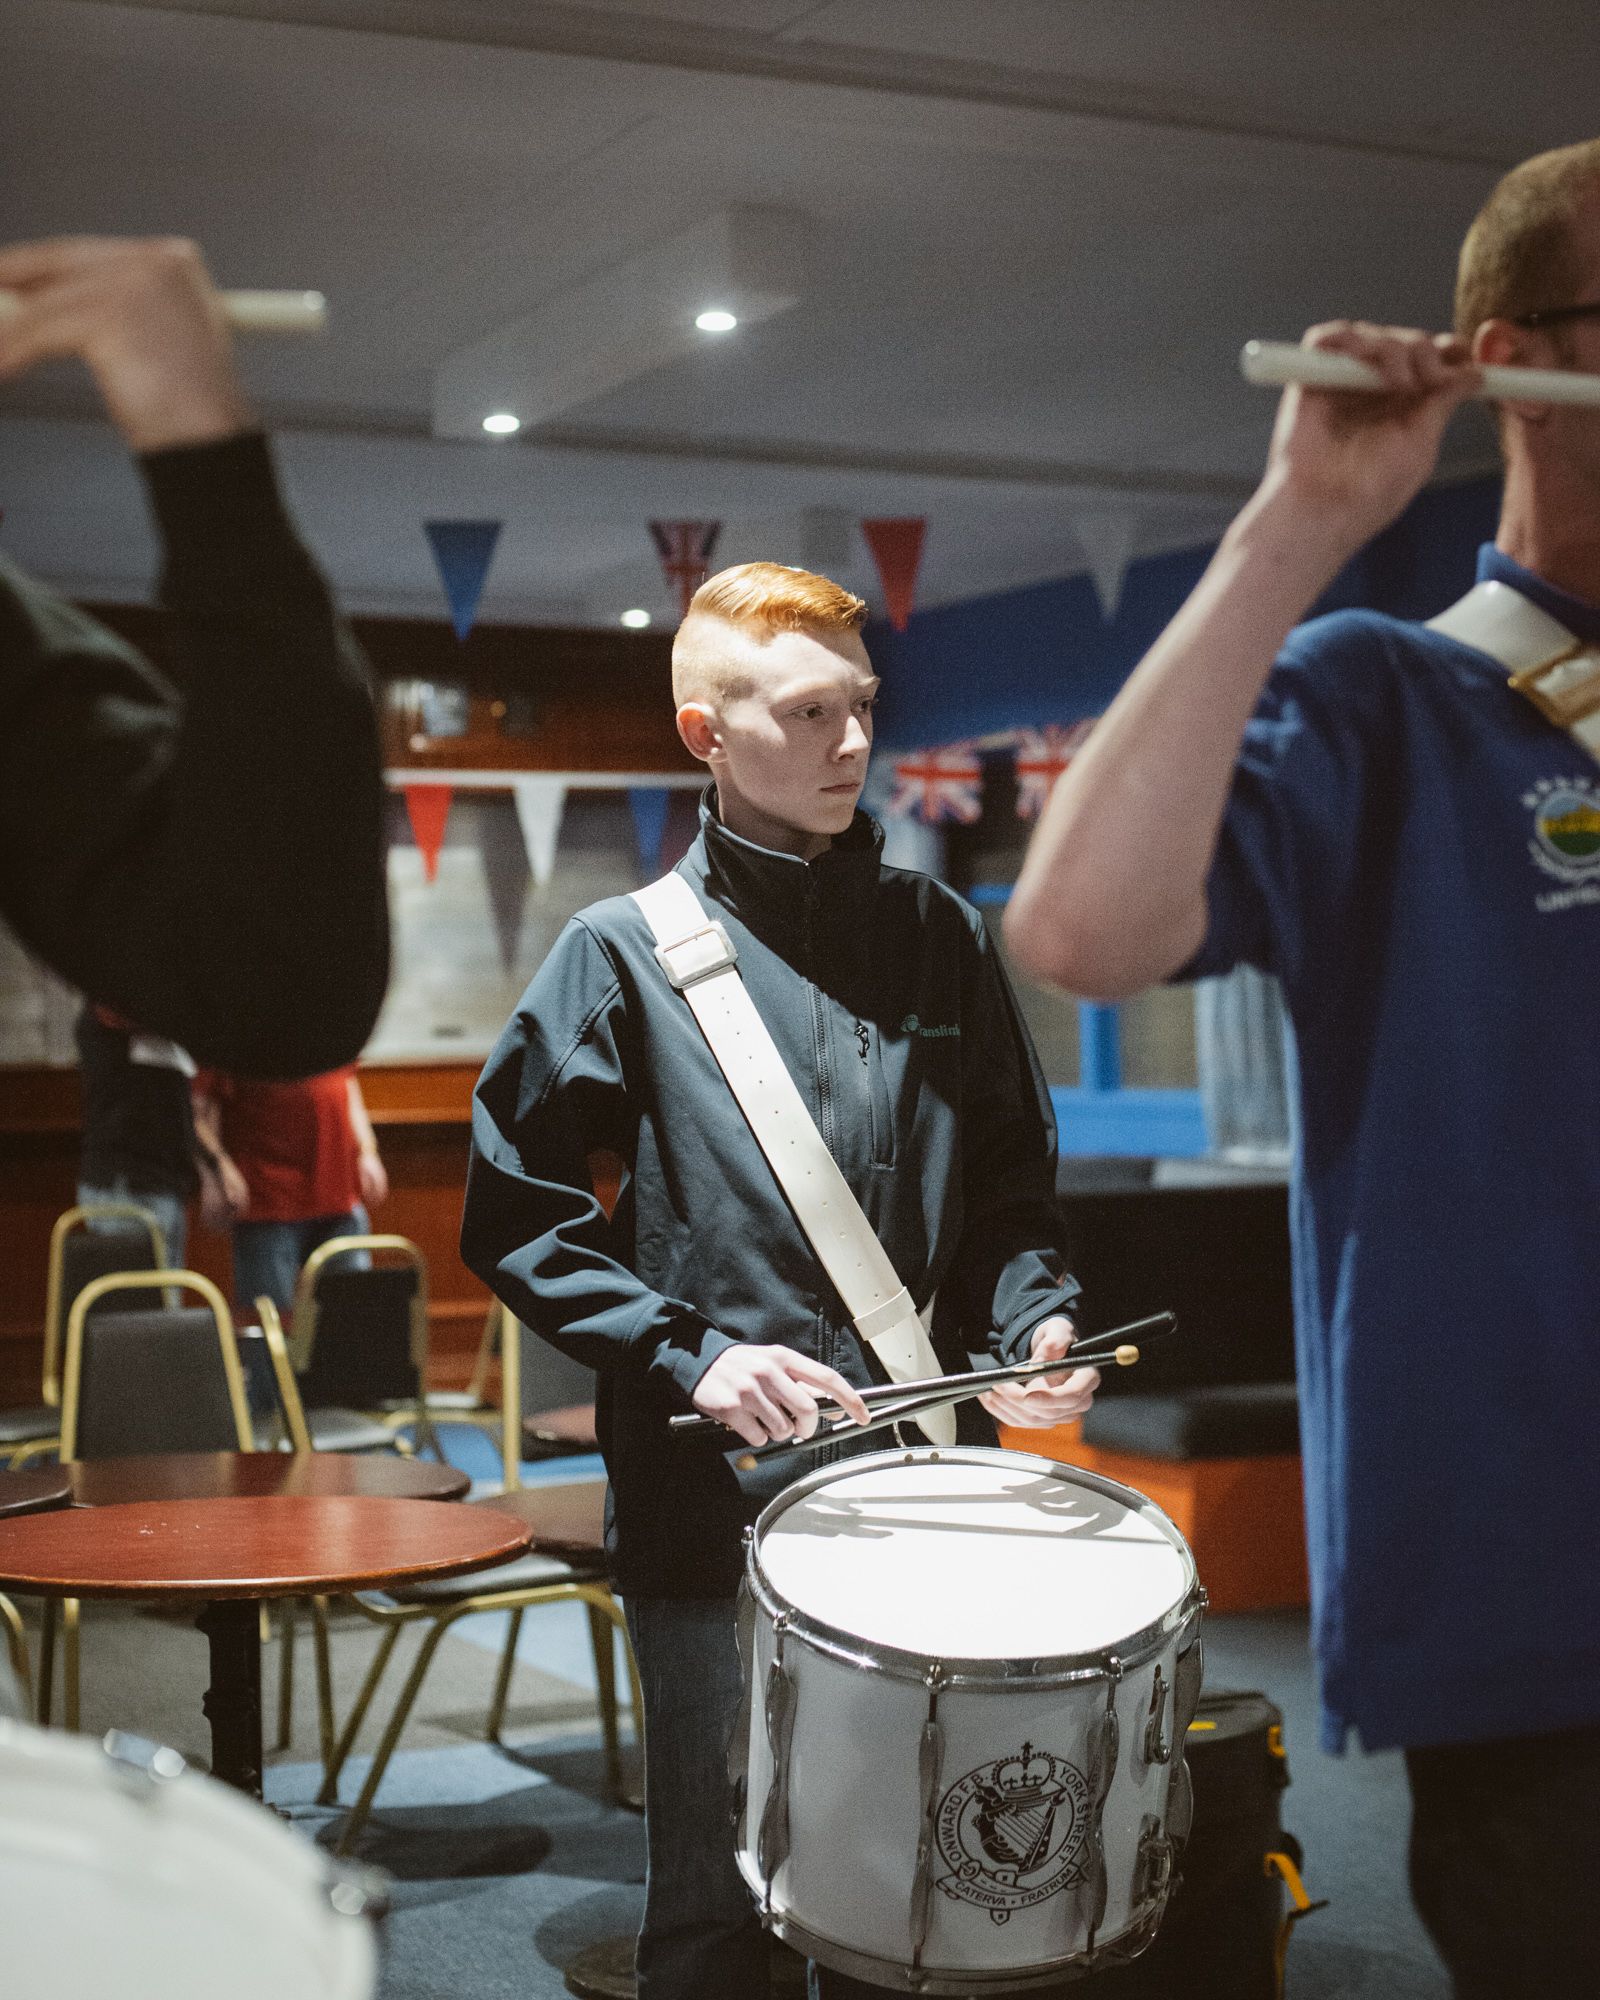 © Jens Schwarz - Boy at marching band rehearsal, Linfield social club, Protestant Upper Shankill area, Belfast, Northern Ireland 07/2017